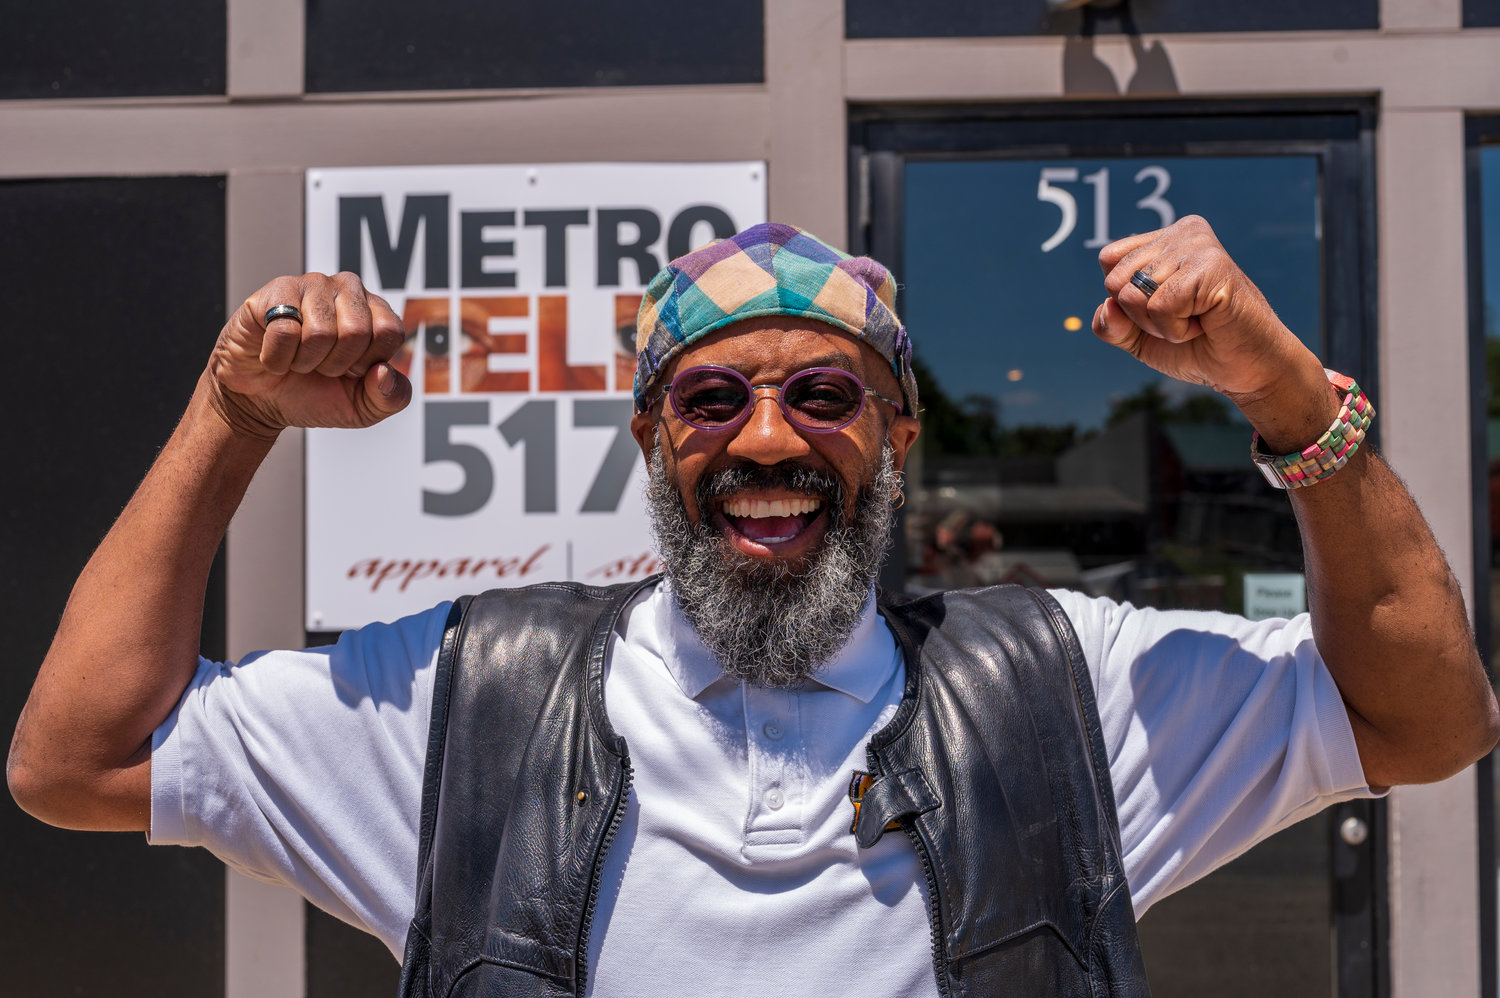 “Metro” Melik Brown, the founder of Lansing Made, is a fixture in Lansing. His latest venture, Metro Melik 517, is a retail store.